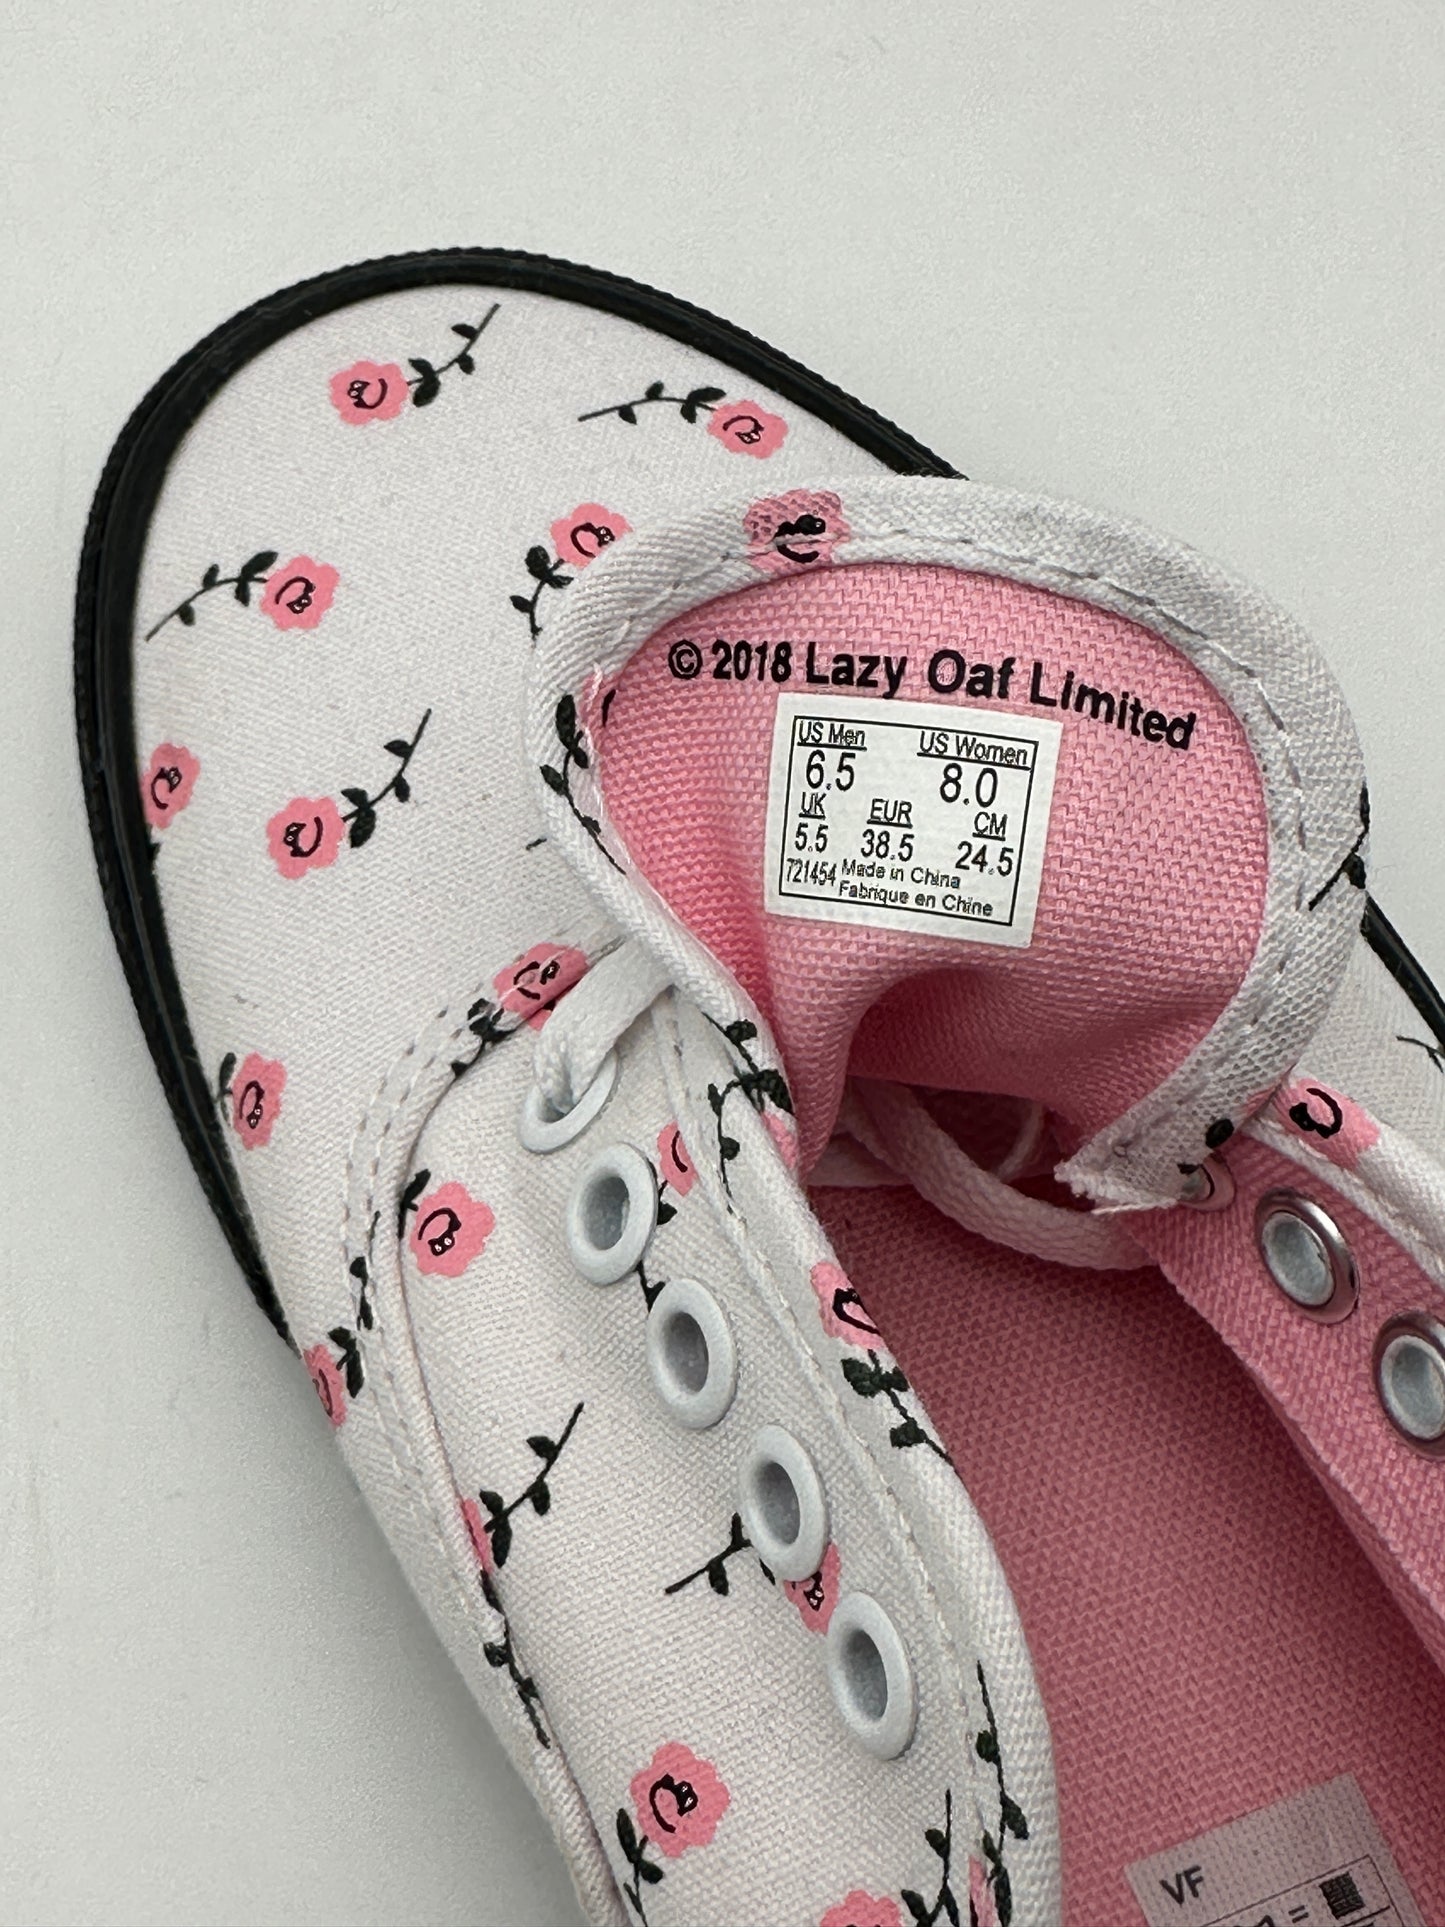 Vans x Lazy Oaf Authentic Women's Size 8 Black & White w/Pink Roses Sneakers Skate Shoes, NWOT